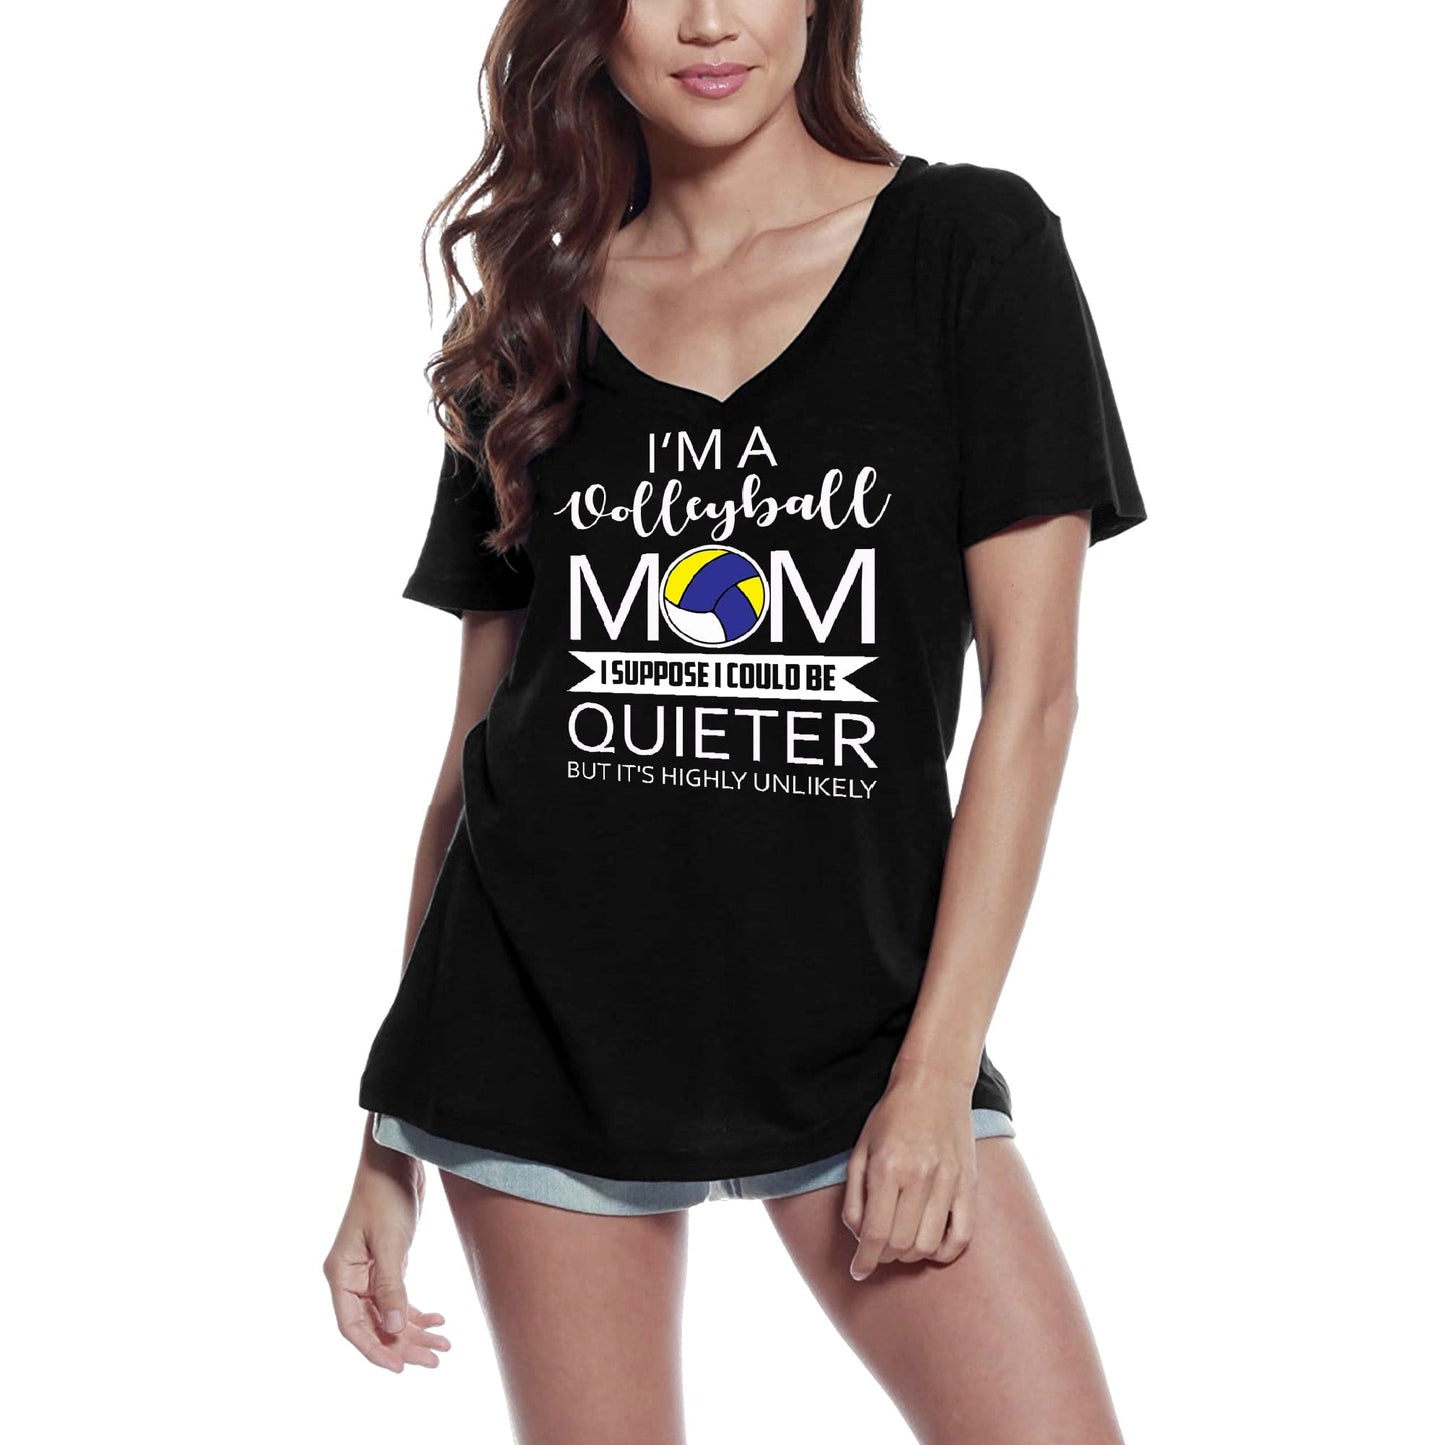 ULTRABASIC Women's T-Shirt I'm Volleyball Mom I Could Be Quieter - Funny Sport Mother Tee Shirt